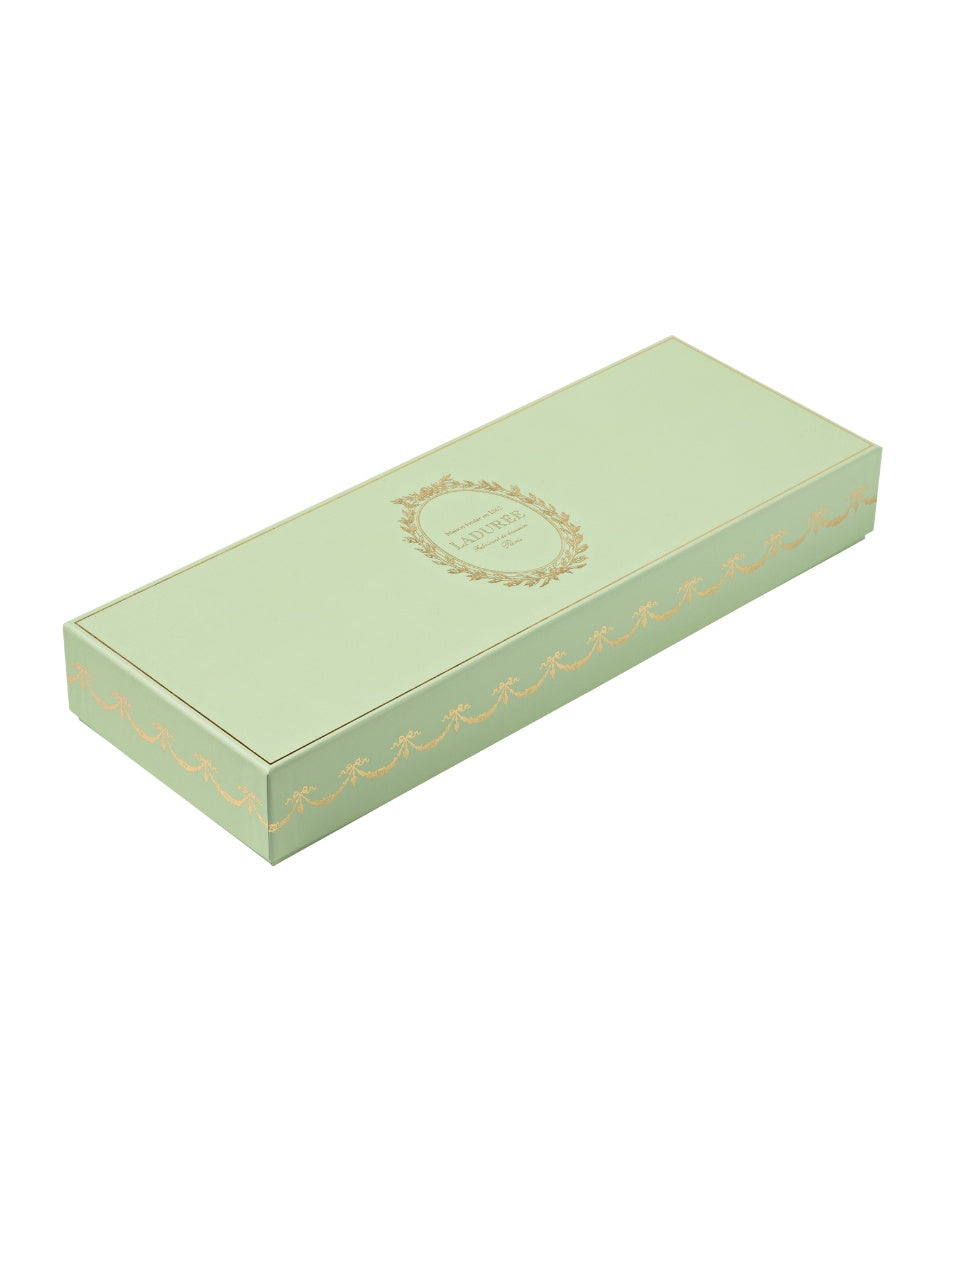 Ladurée Assorted Macarons Gift Box - 35 piece Classic Edition | Exquisite Wine & Alcohol Gift Delivery Toronto Canada | Vyno